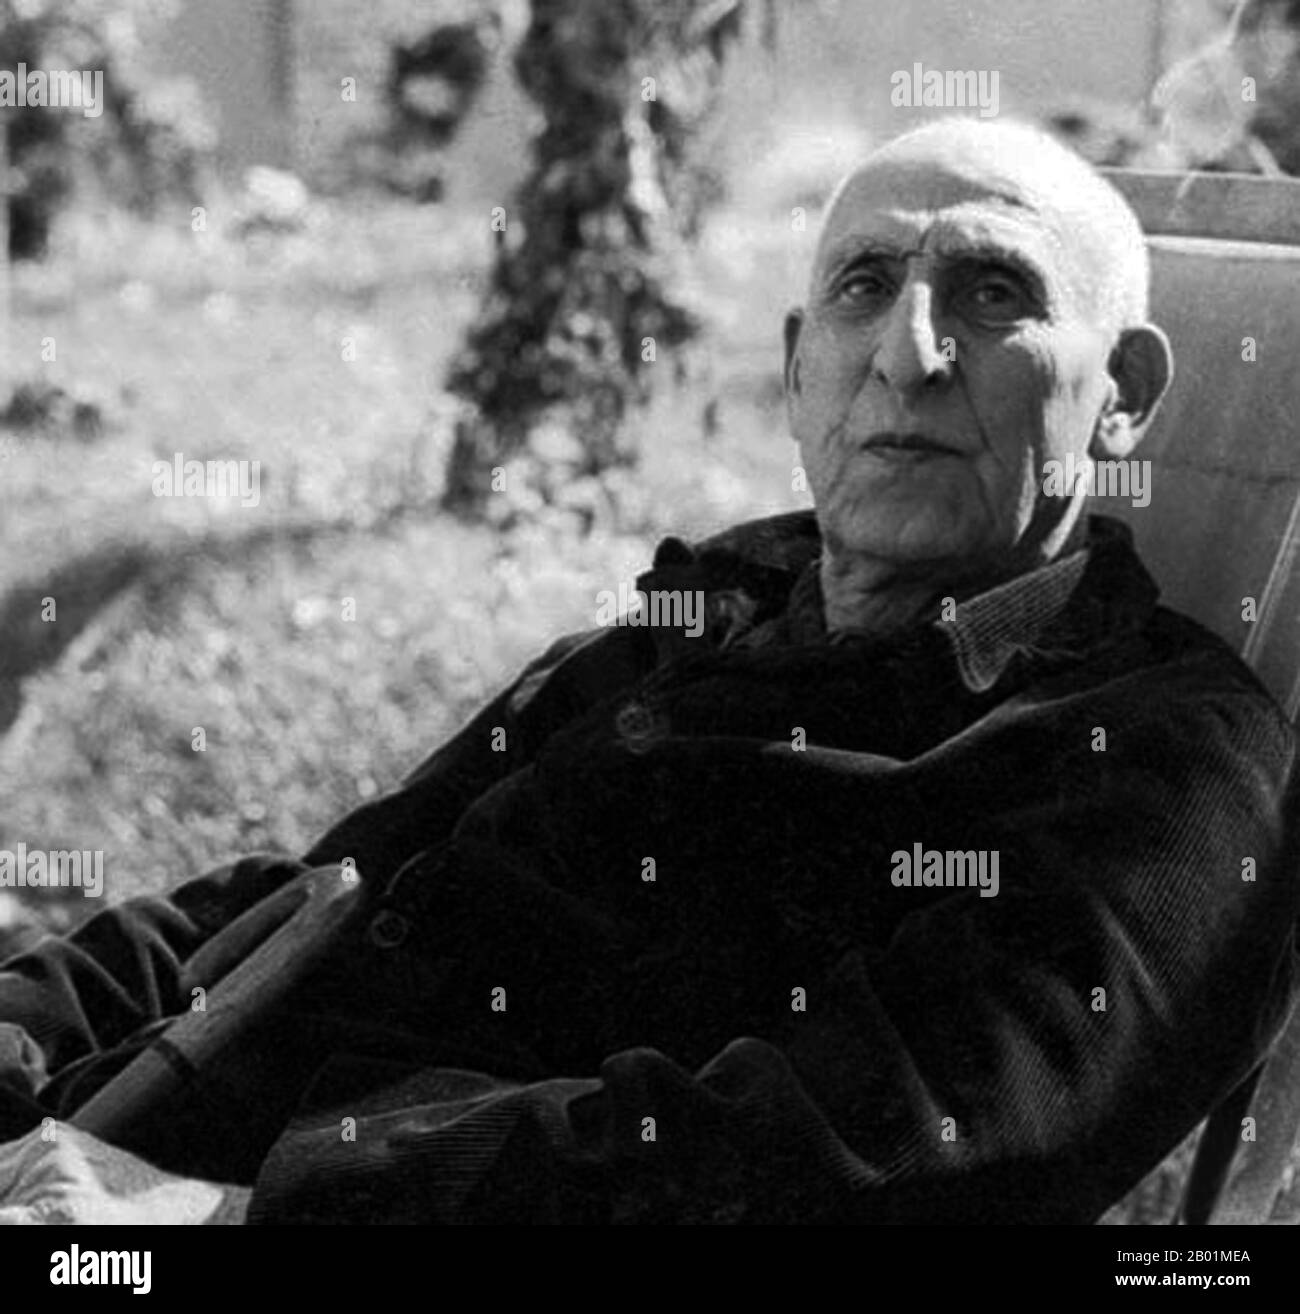 Iran/Persia: Mohammad Mosaddegh or Mosaddeq (16 June 1882 – 5 March 1967), Prime Minister of Iran from 1951 until being overthrown in a coup d'état in 1953. Photo from his time under house arrest, Ahmadabad, c. 1960s.  The Mossadeq administration introduced a wide range of social reforms but was most notable for its nationalisation of the Iranian oil industry, which had been under British control since 1913 through the Anglo-Persian Oil Company.  Mosaddegh was removed from power in a coup on 19 August 1953, organised and carried out by the United States CIA at the request of British MI6. Stock Photo